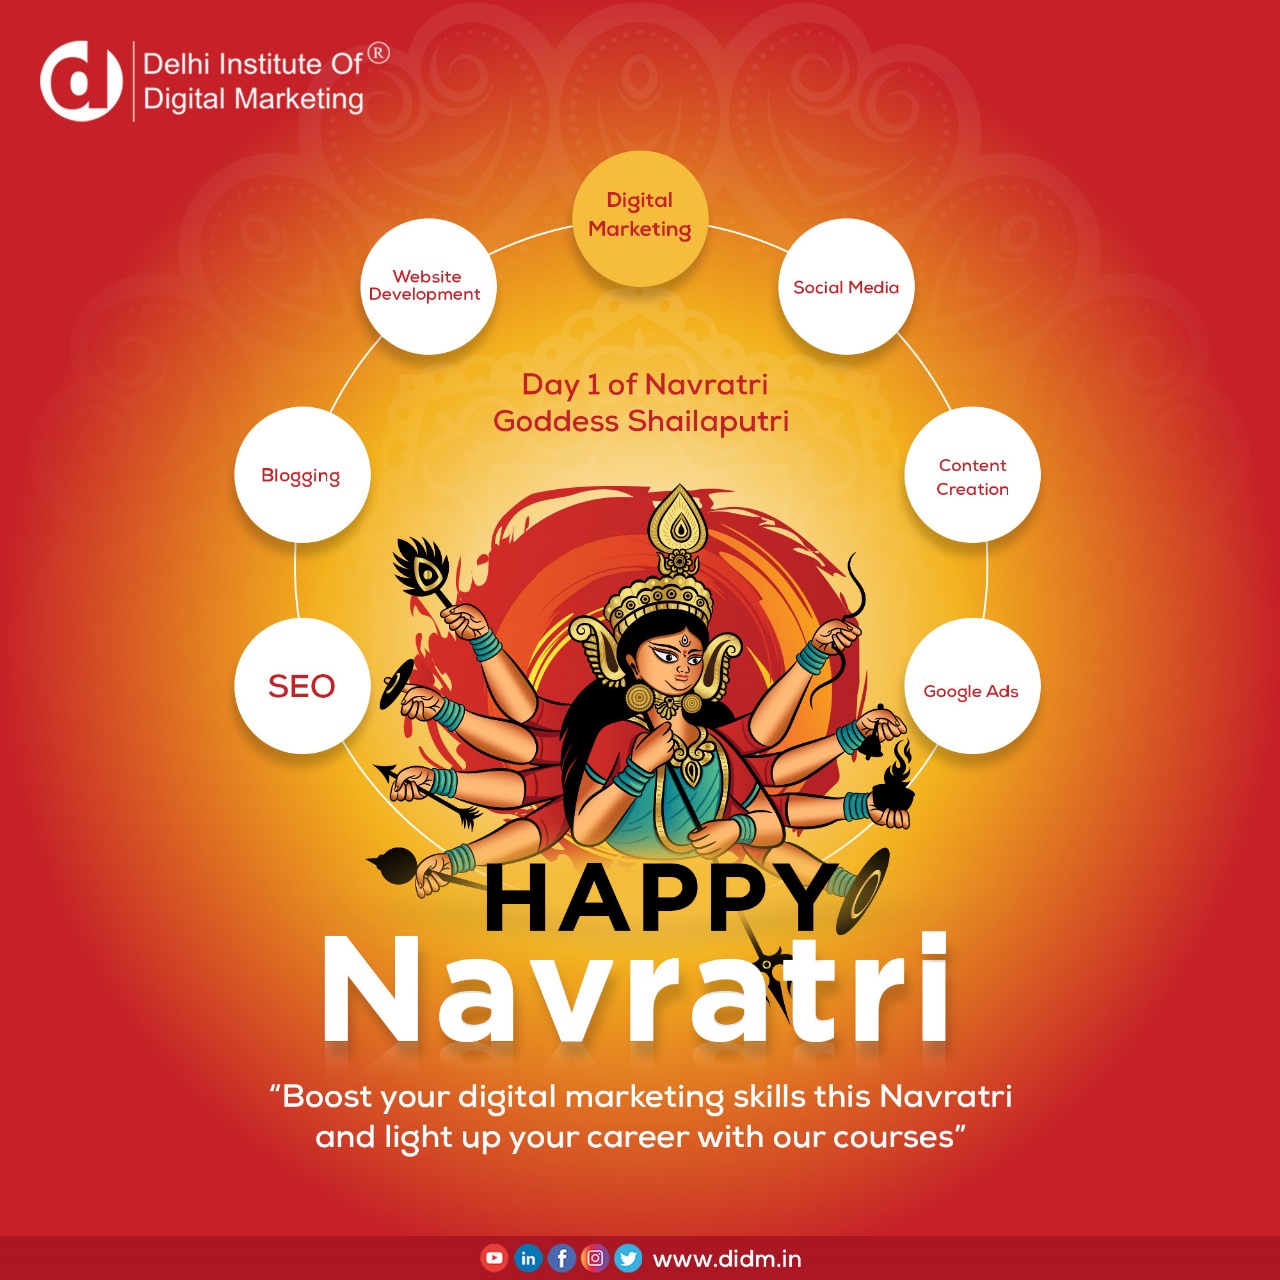 DIDM Wishes You All A Blessed & Prosperous Happy Navratri!